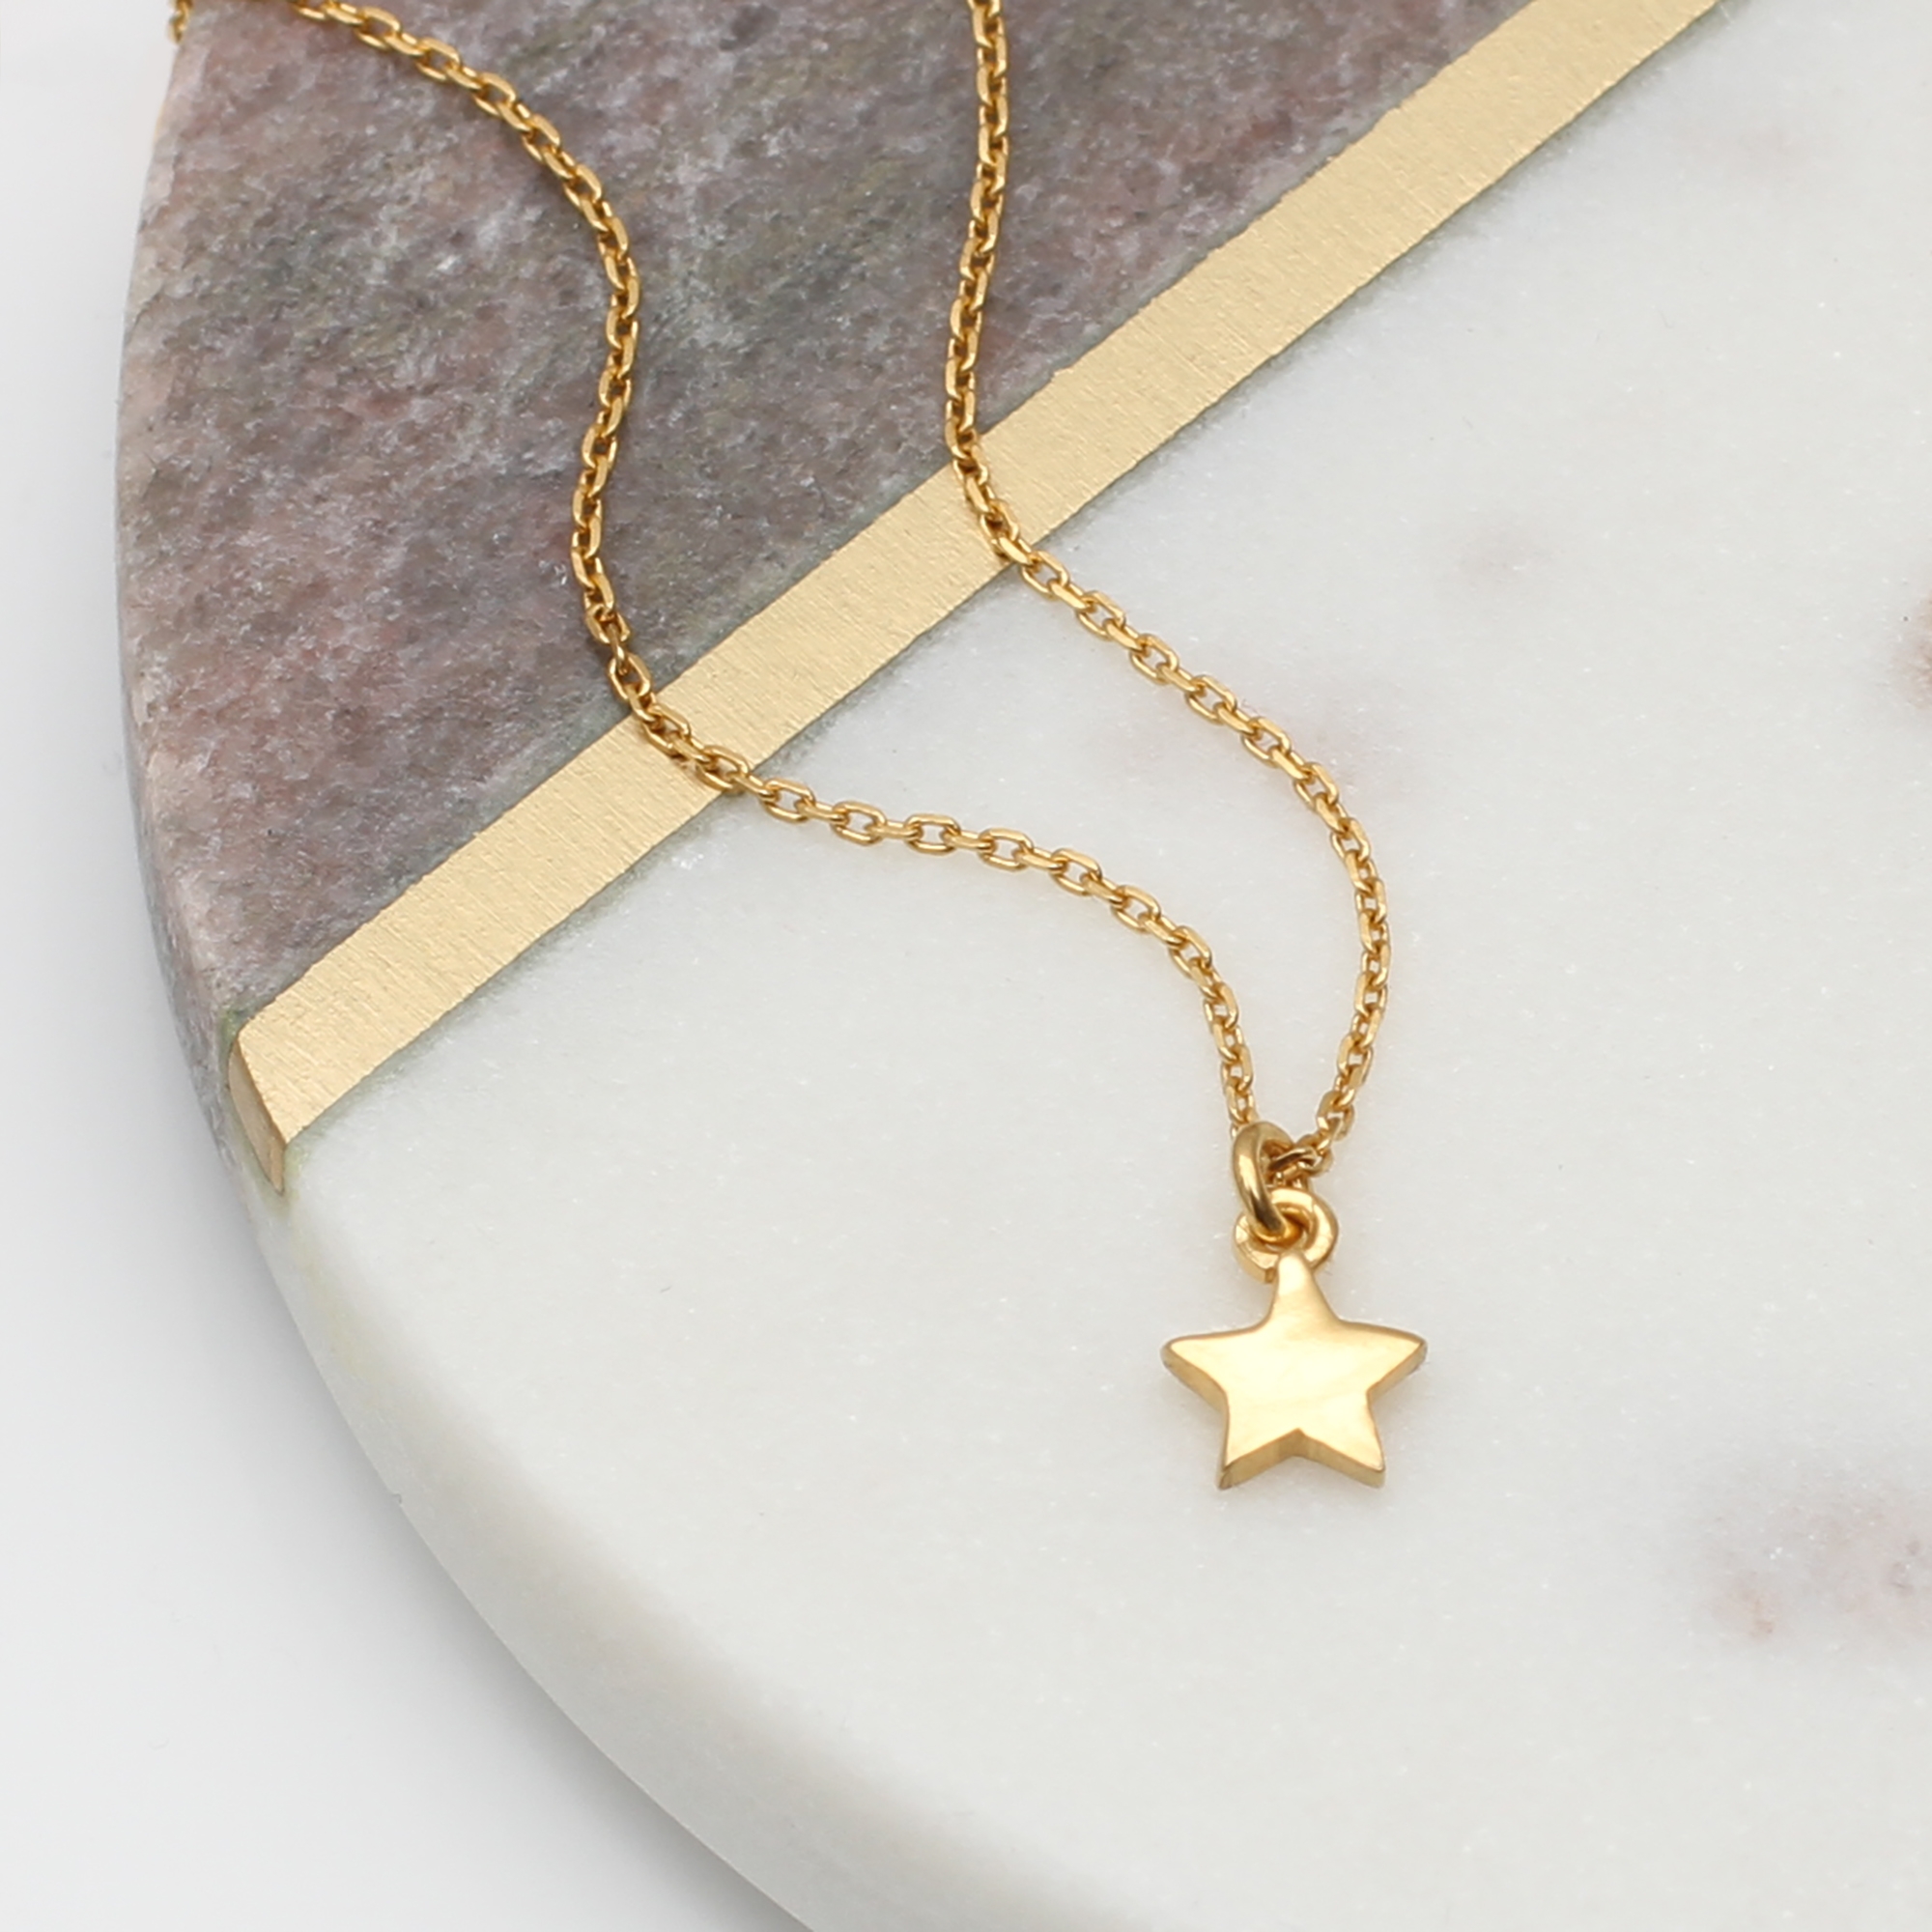 18ct Gold Plated Tiny Star Necklace – Hurley Burley